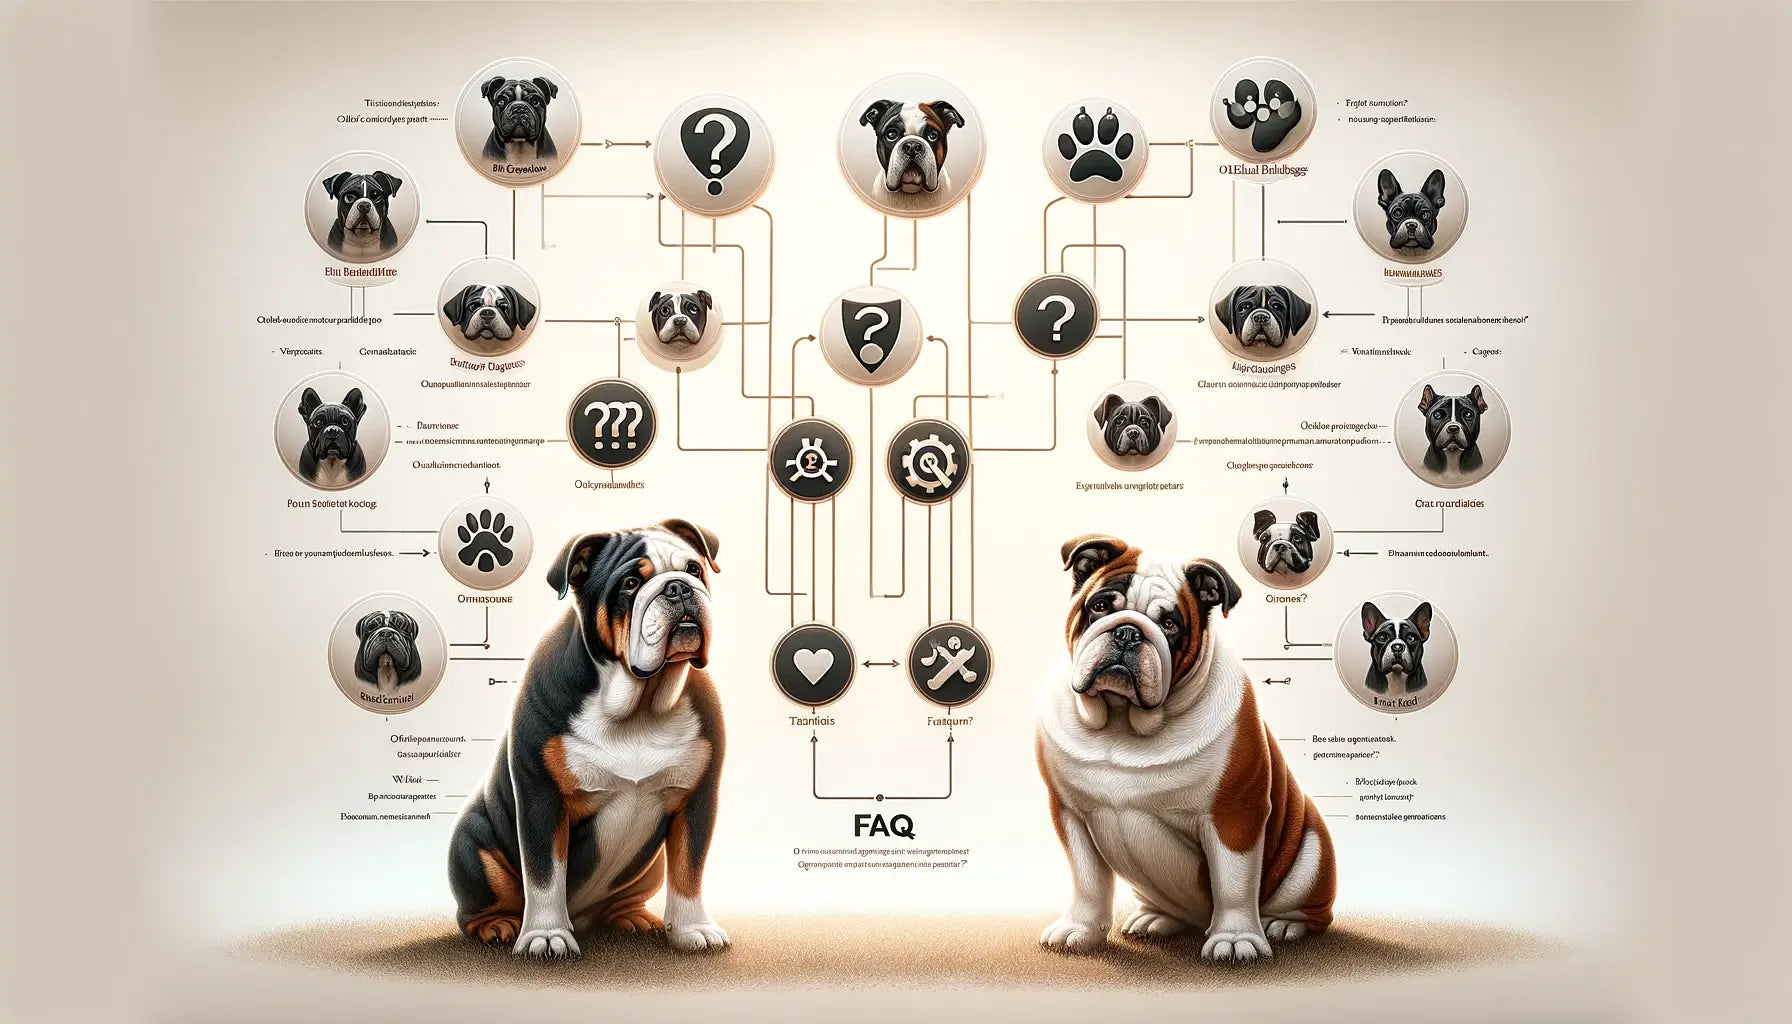 Image showing frequently asked questions (FAQs) about Olde English Bulldogge vs English Bulldog.